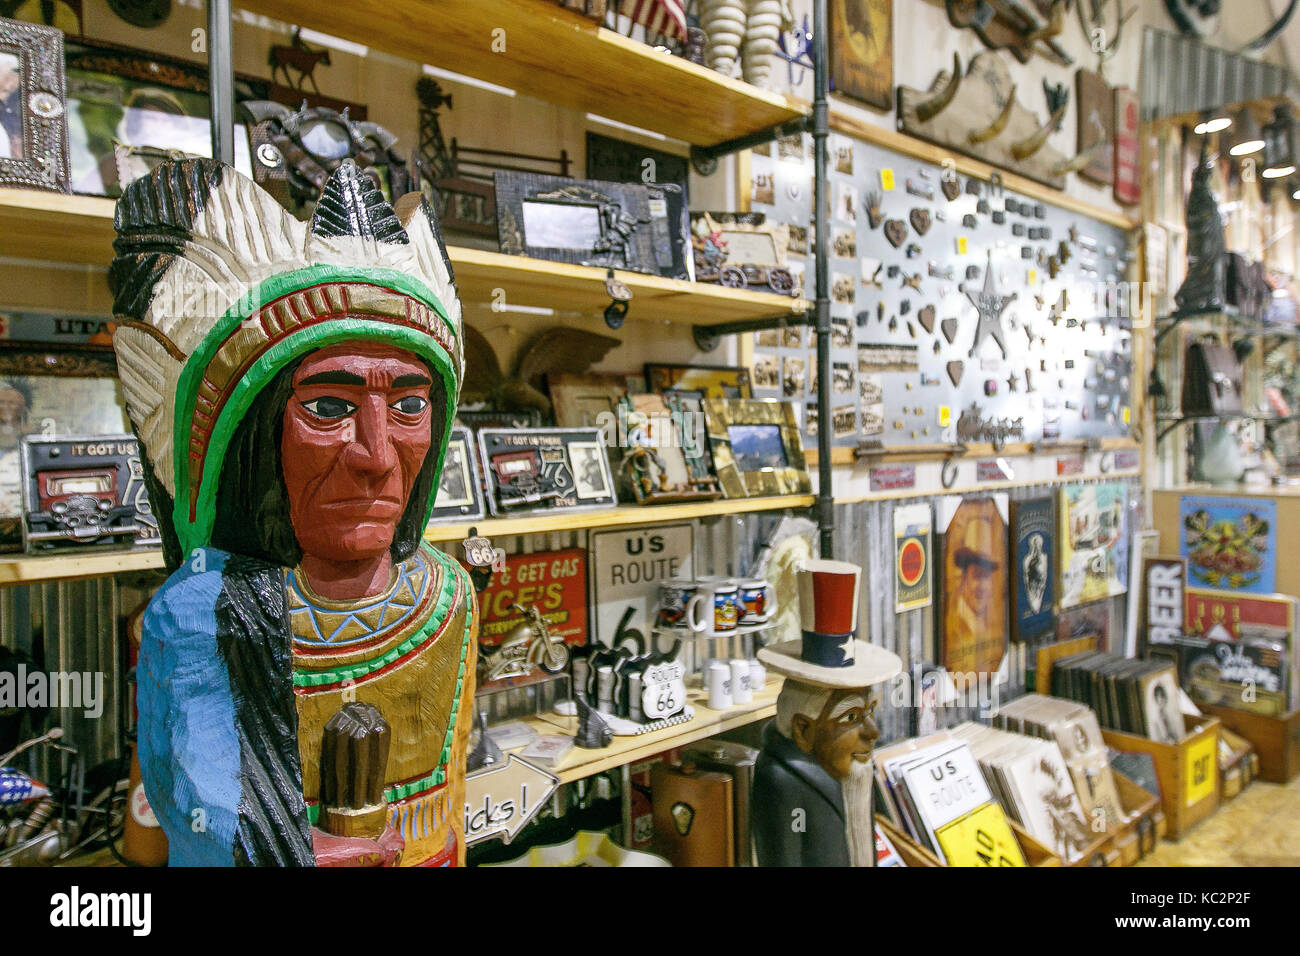 Wooden statues of an Indian stands in front of shelves of a Wild West themed store in Manhattan. Stock Photo